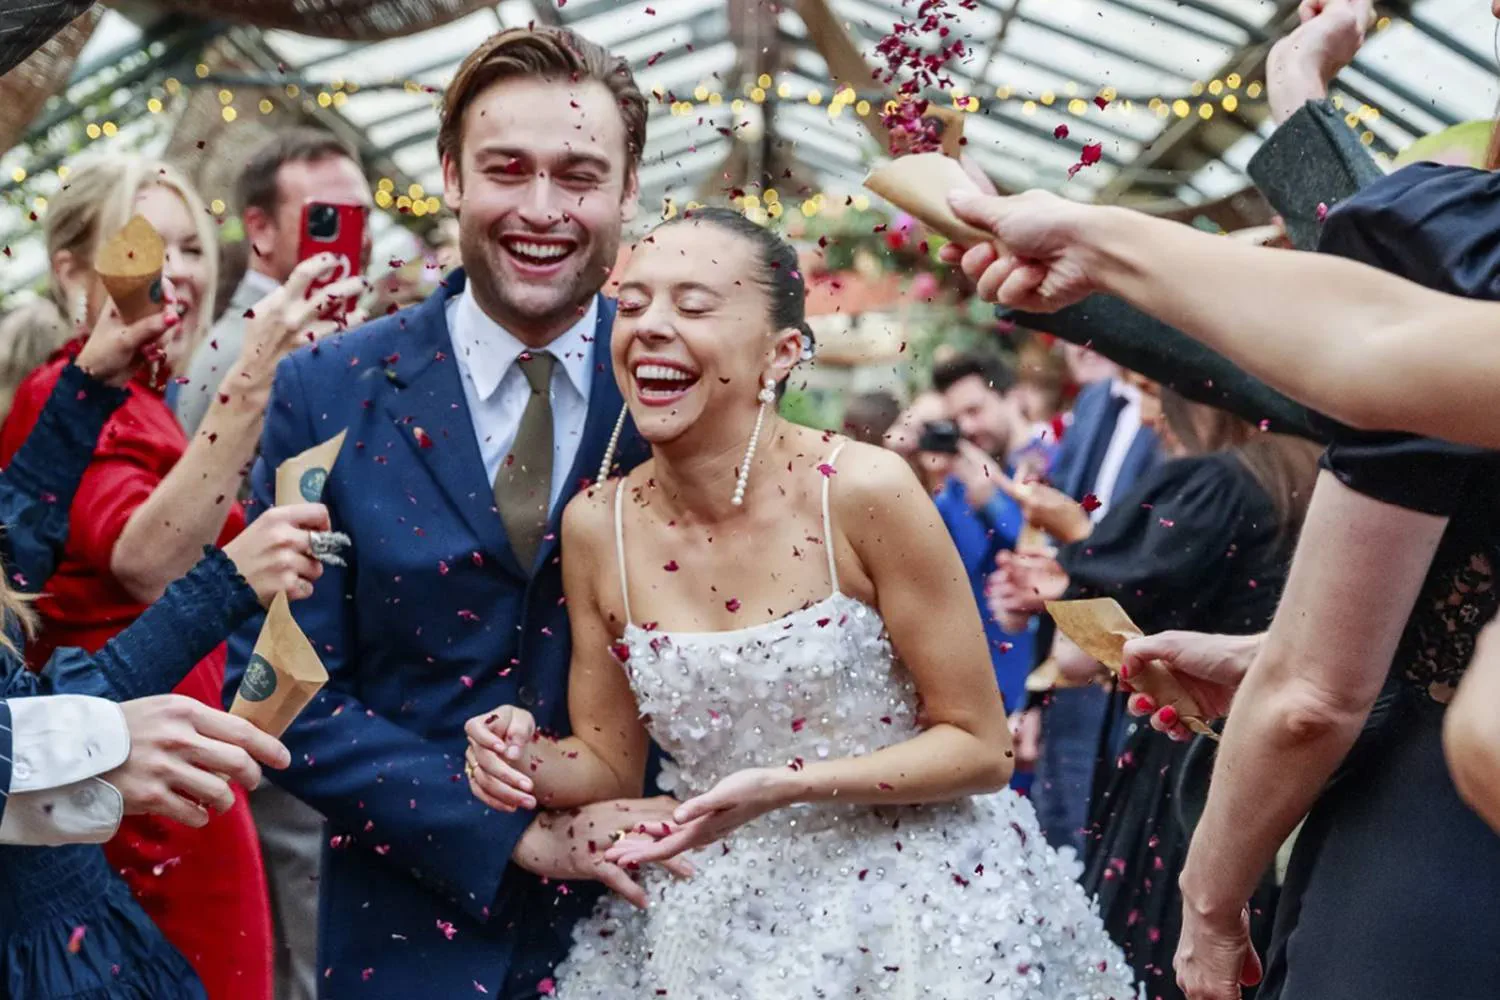 Bel Powley marries Douglas Booth in a custom Miu Miu wedding gown and  reception dress. She chose a simple shape: thin straps and square neck,  tight bodice, and bell-shaped skirt stopping at